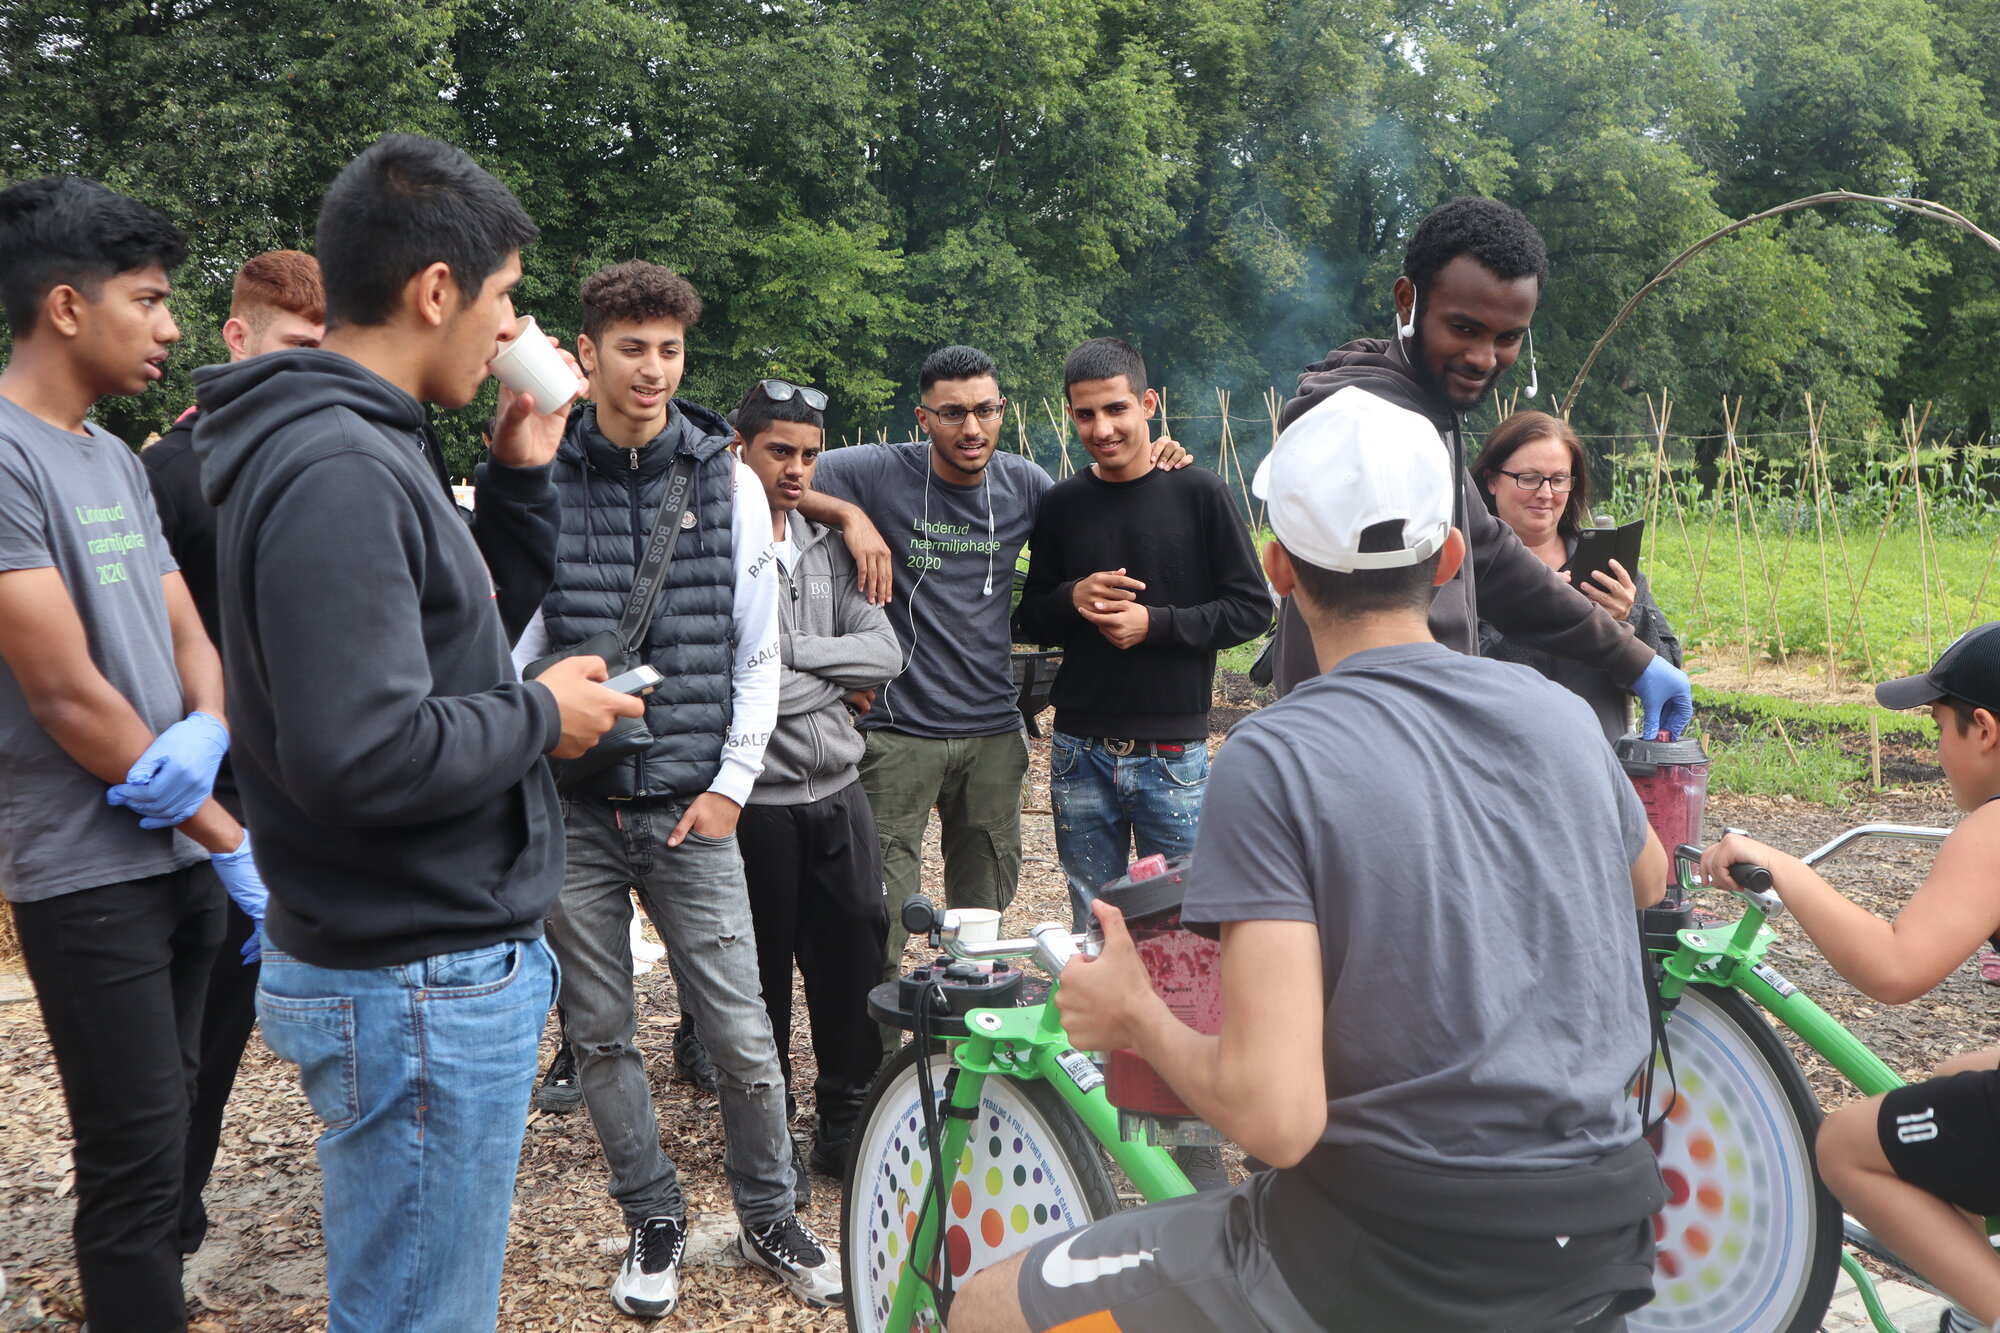 Image 5. Youth gathering around the smoothie bikes during an event at Linderud farm. Source: Kimberly Weger.